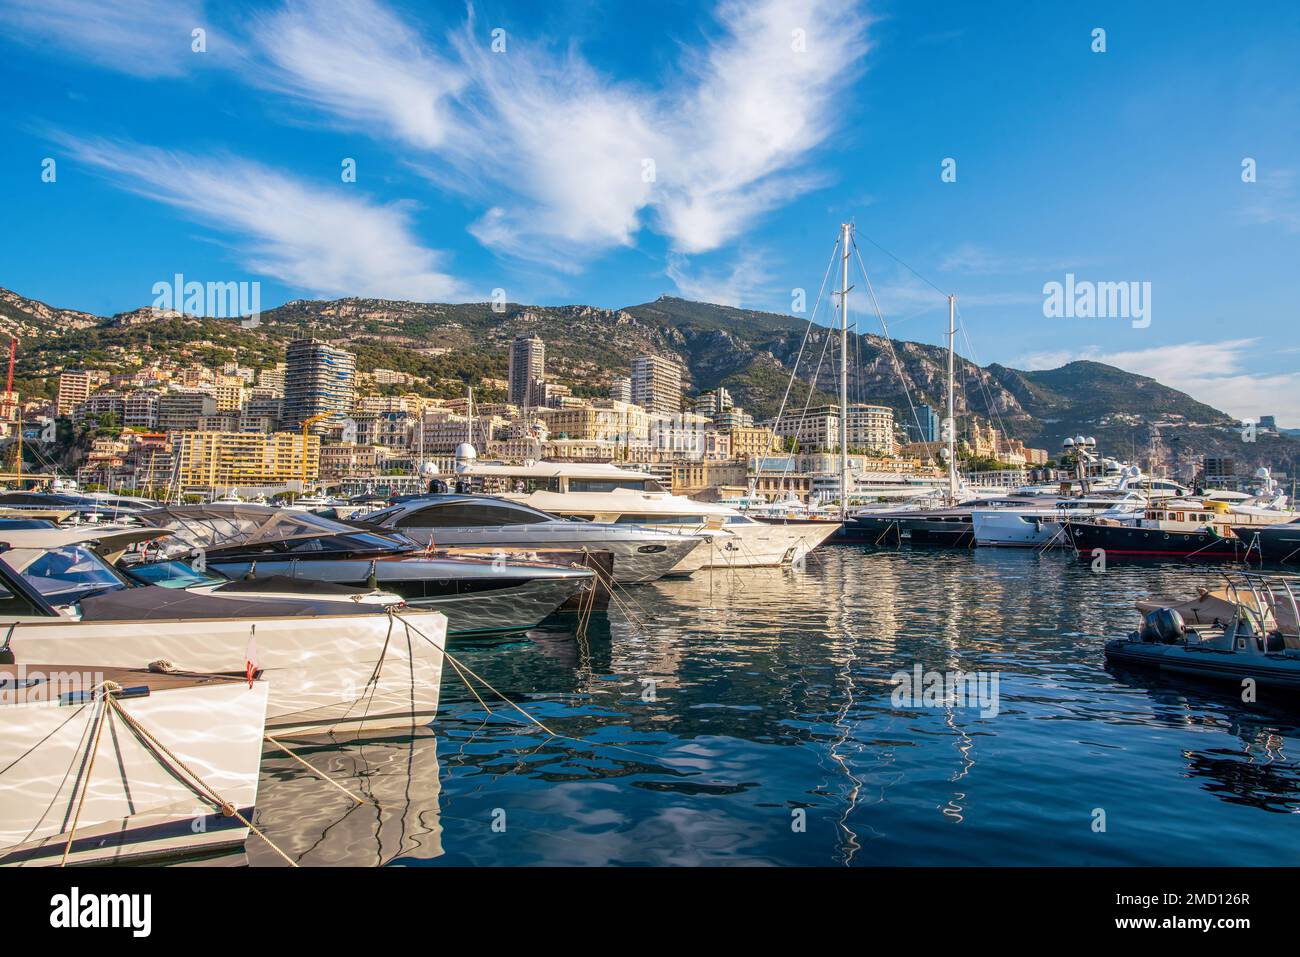 Idyllic view of the harbor (Port Hercule) of Monaco with luxury yachts and the skyline of Monaco in the background - also famous old  building 'Monte Stock Photo